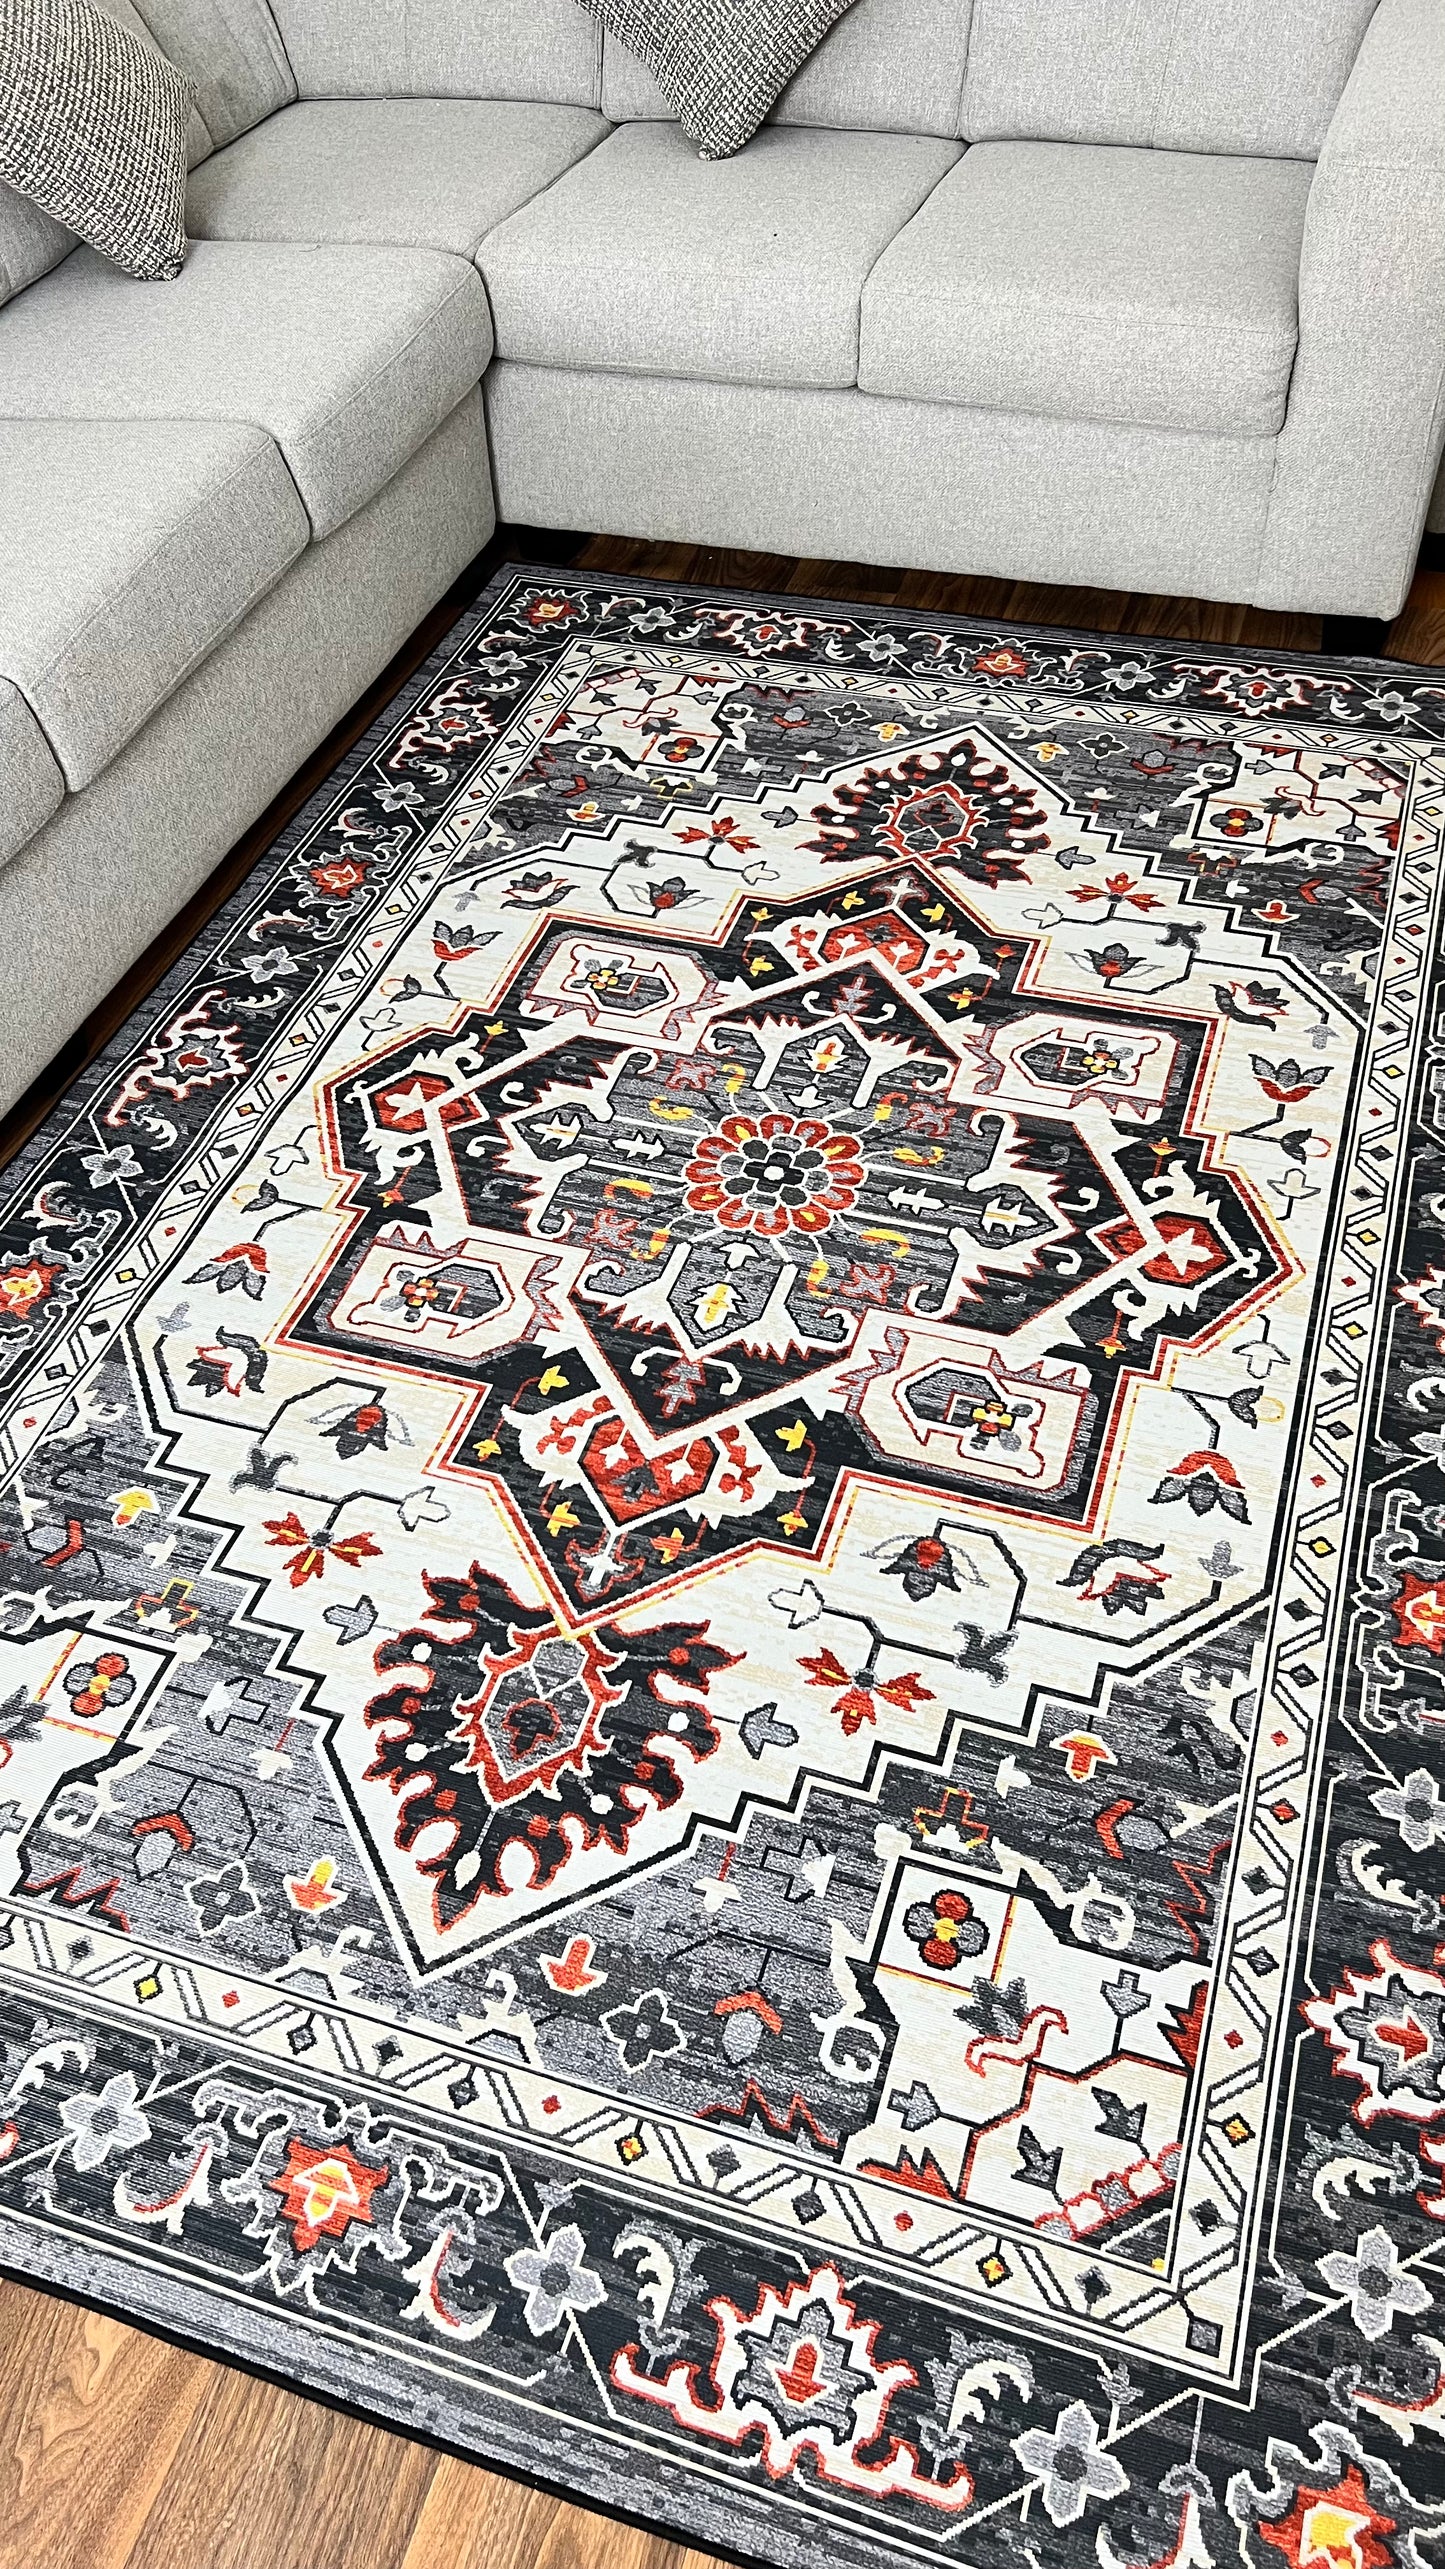 Artful Threads: Persian Rugs Beyond Compare